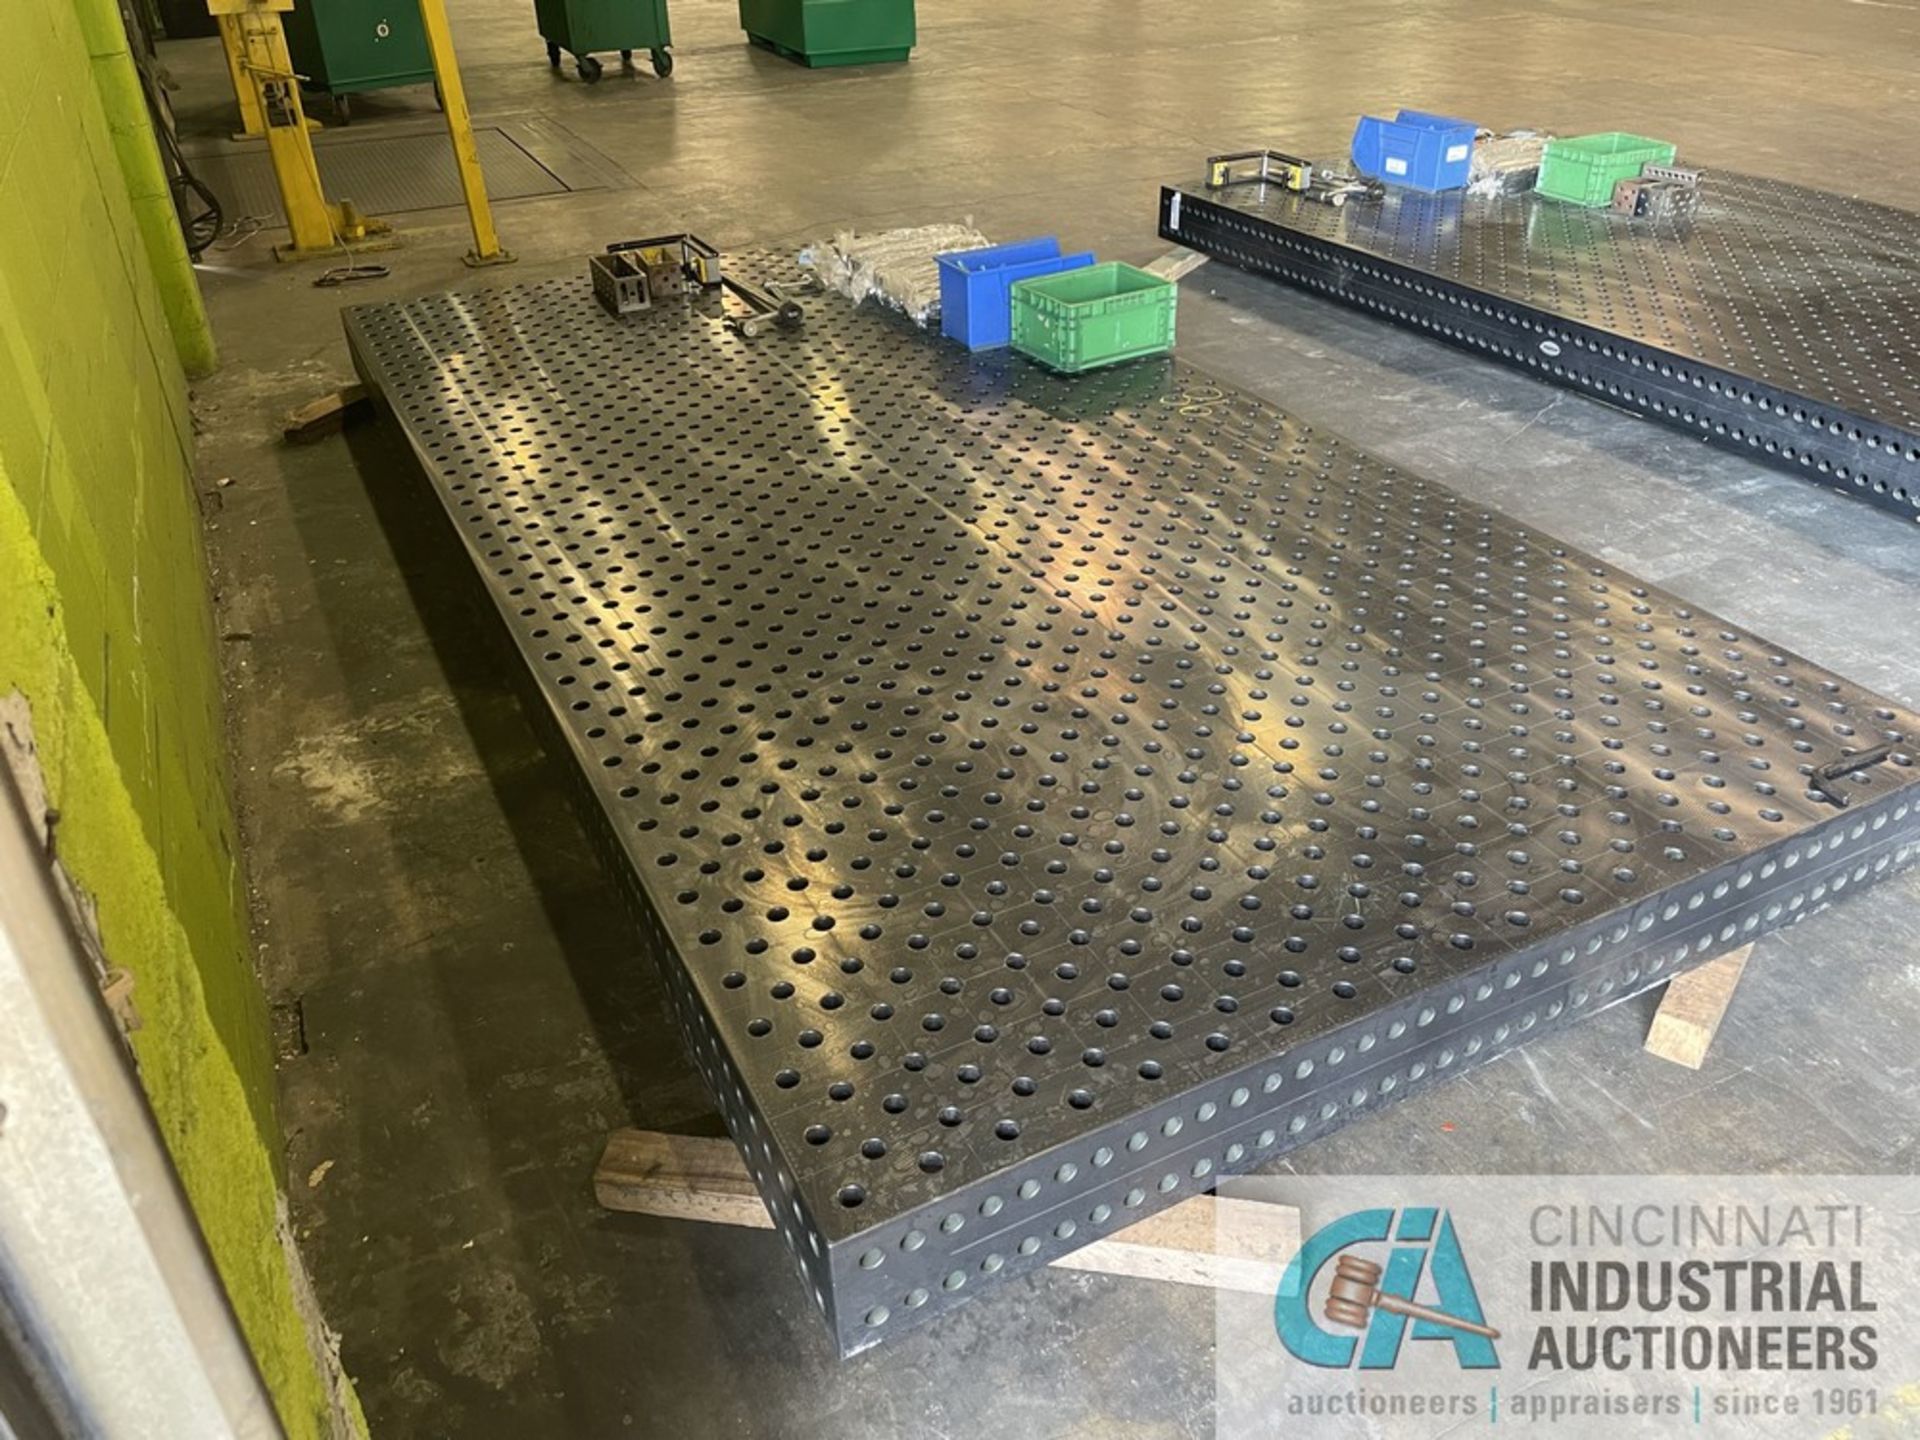 SIGMUND DEMMLER STYLE WELD TABLE 157.5" L X 78.75" W X 8" H (NEW 2016, NEVER USED) Approx. 1” Holes - Image 4 of 8